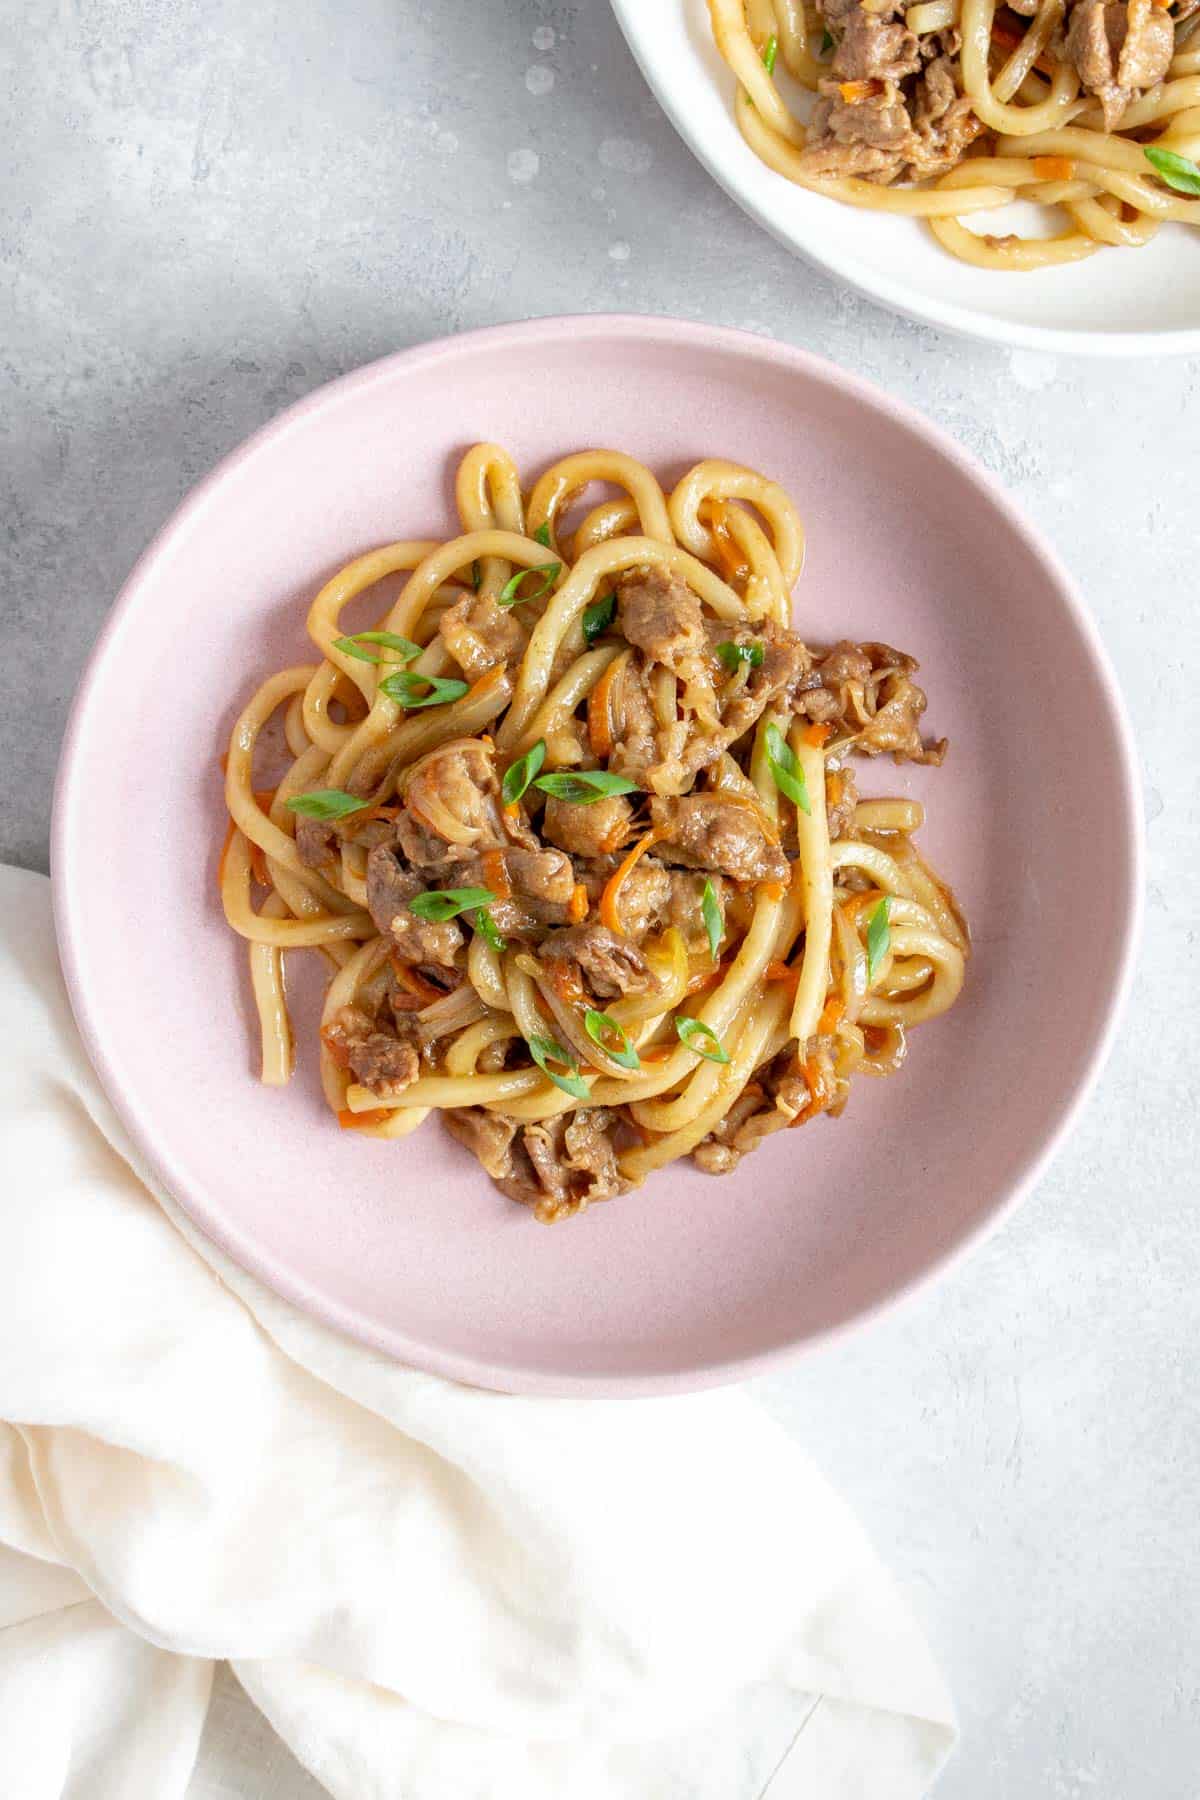 Beef udon on a plate.